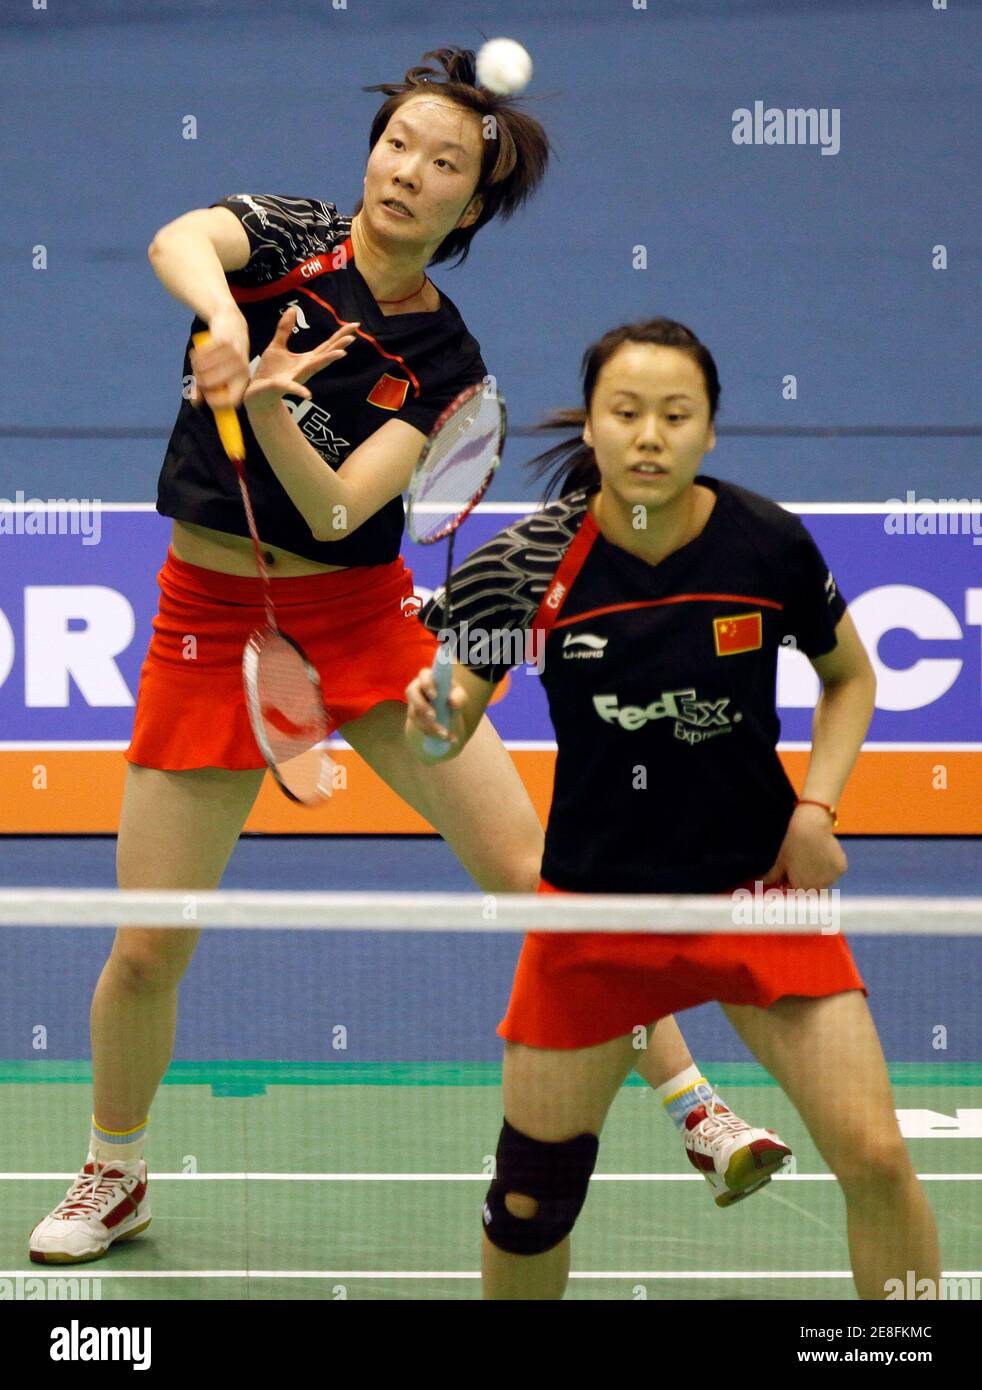 China's Cheong Shu (L) returns a shot as her team mate Zhao Yunlei watches during their women's doubles semi-final match against South Korea's Lee Kyung-won and Ha Jung-Eun at the Victor Korea Open Badminton Super Series in Seoul January 16, 2010.  REUTERS/Jo Yong-Hak (SOUTH KOREA - Tags: SPORT BADMINTON) Stock Photo